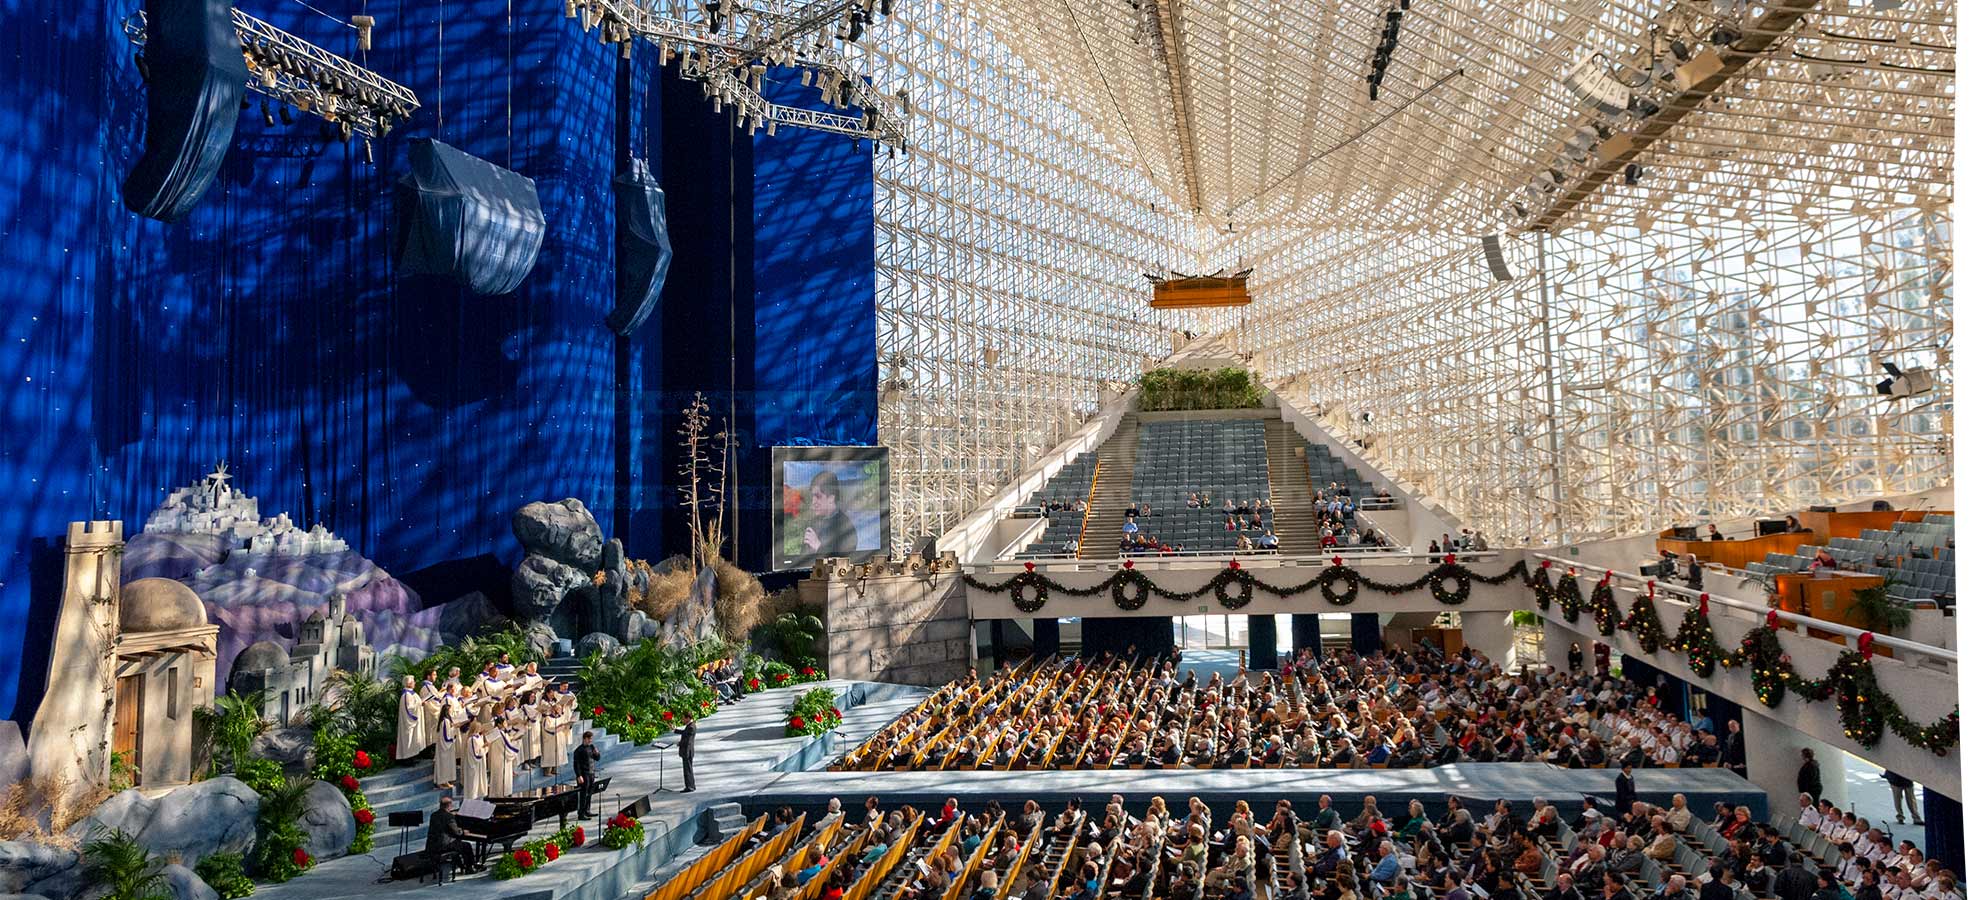 Christmas performance at the Crystal Cathedral in Garden Grove California